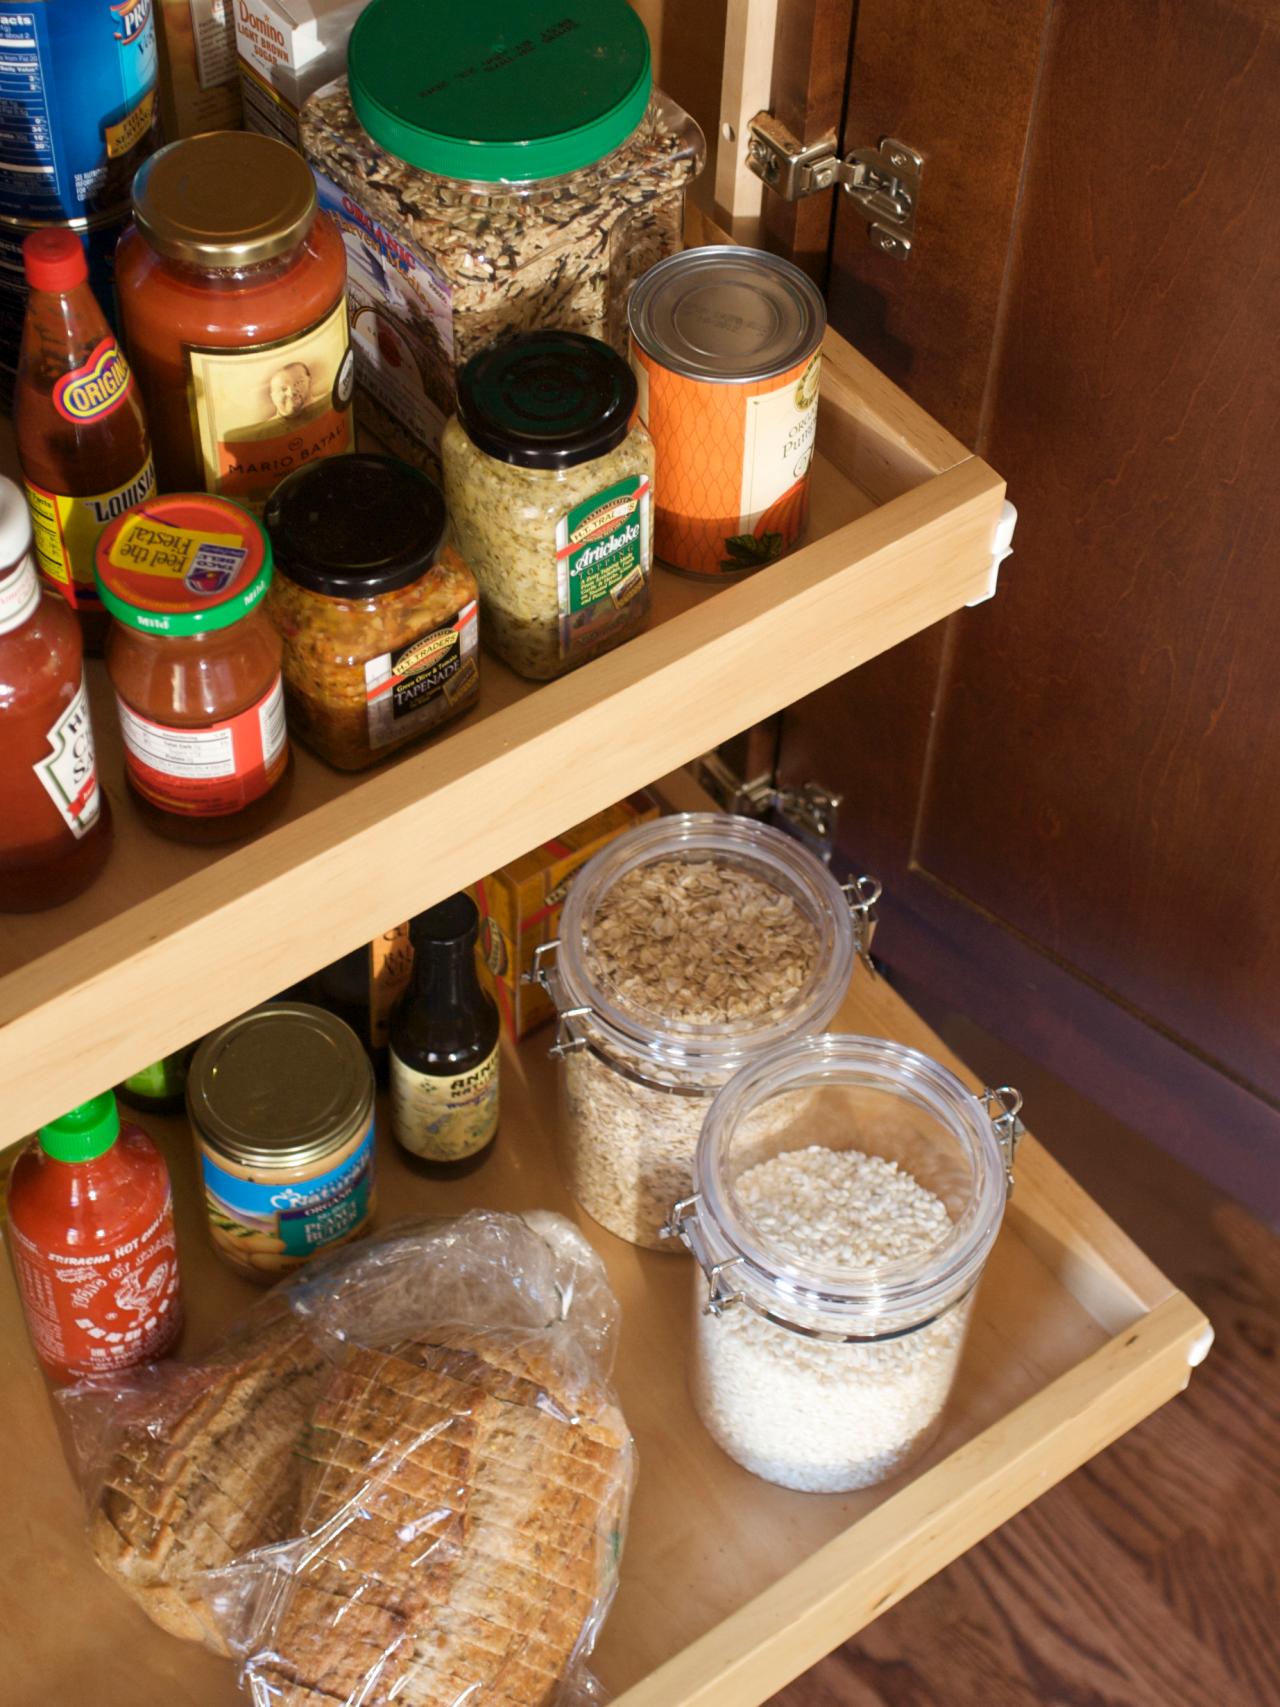 Pullout shelves on lower cabinets help you access items that would otherwise be harder to reach.